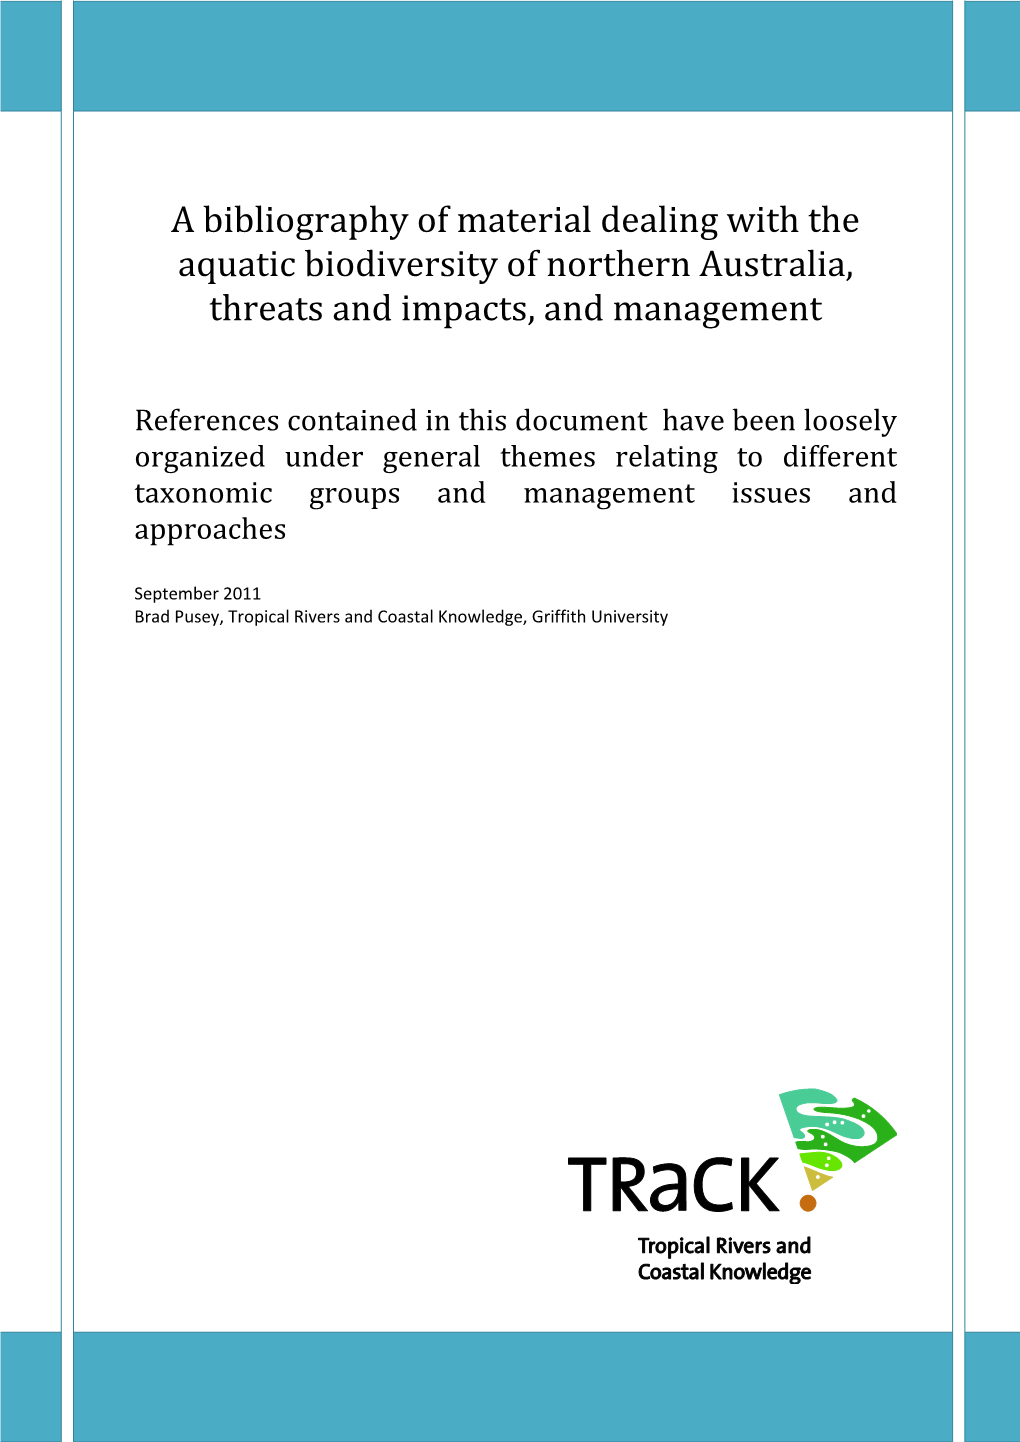 A Bibliography of Material Dealing with the Aquatic Biodiversity of Northern Australia, Threats and Impacts, and Management